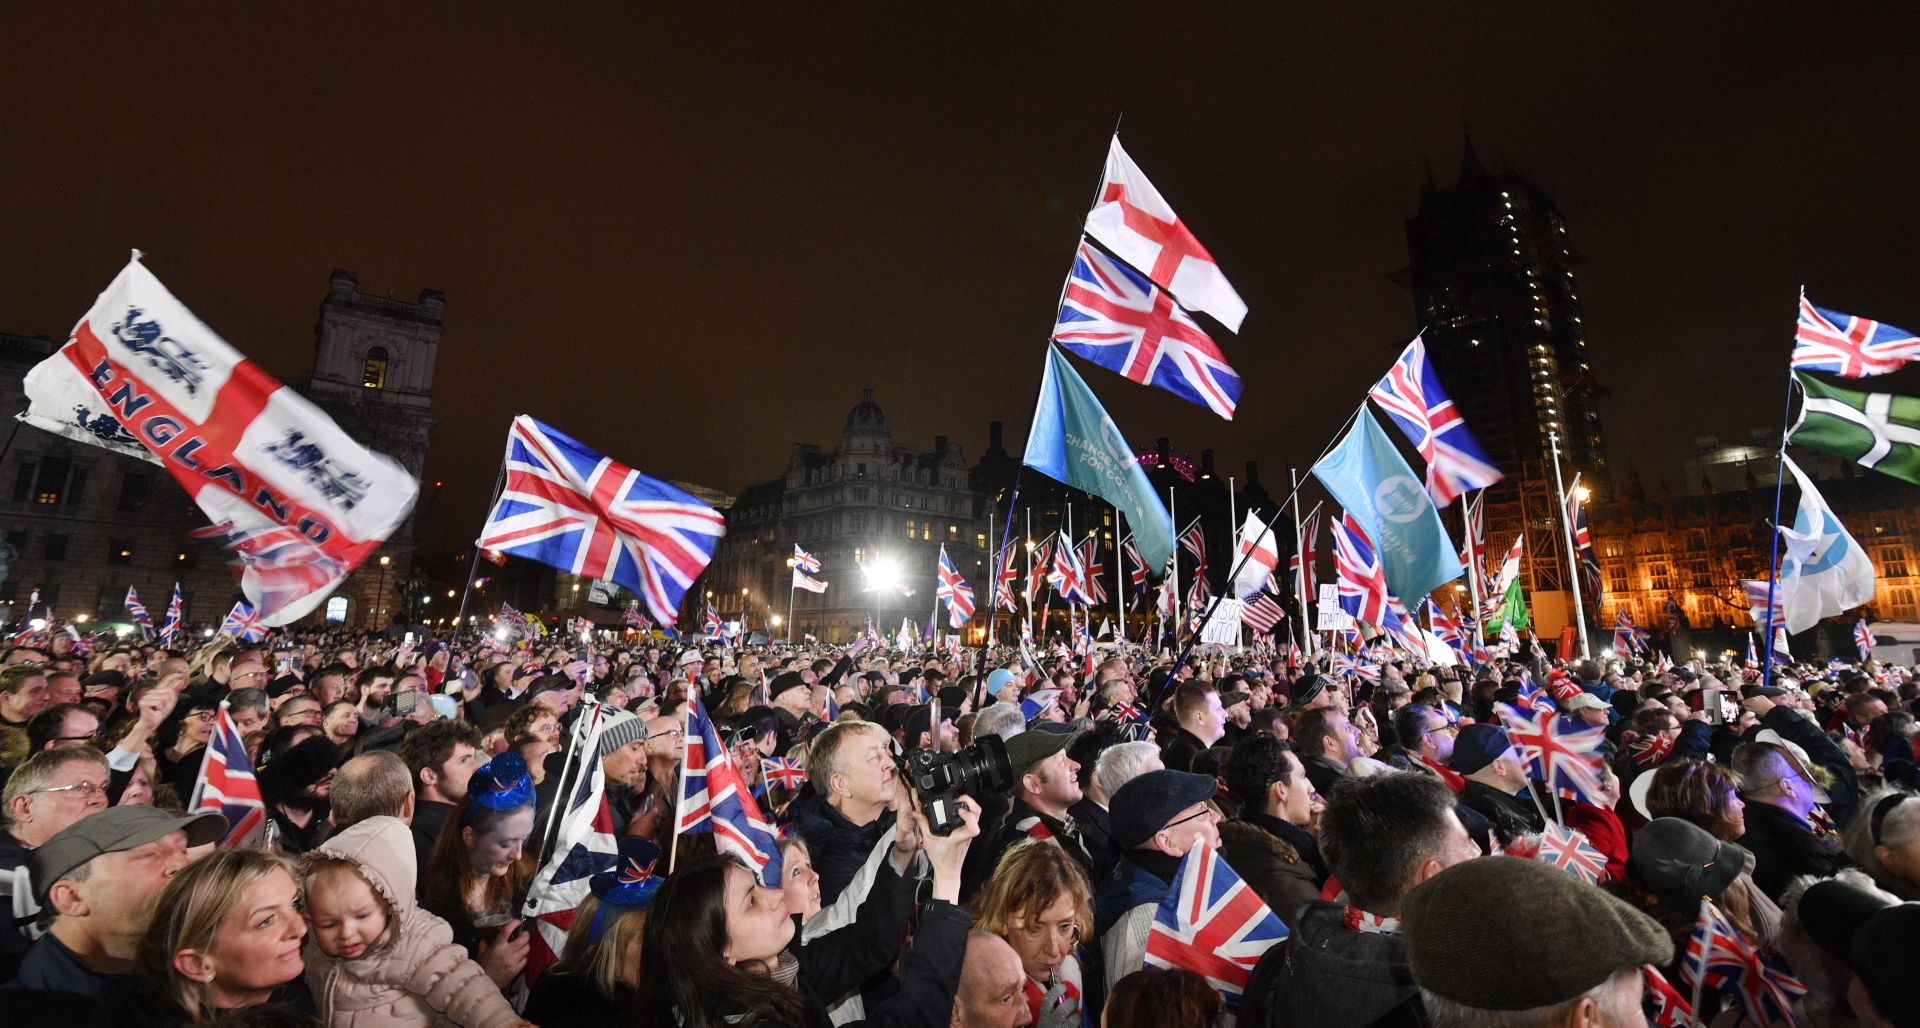 epa08183164 Pro Brexit supporters celebrate outside the Houses of Parliament in London, Britain, 31 January 2020. Britain officially exits the EU on 31 January 2020, beginning an eleven month transition period.  EPA/NEIL HALL